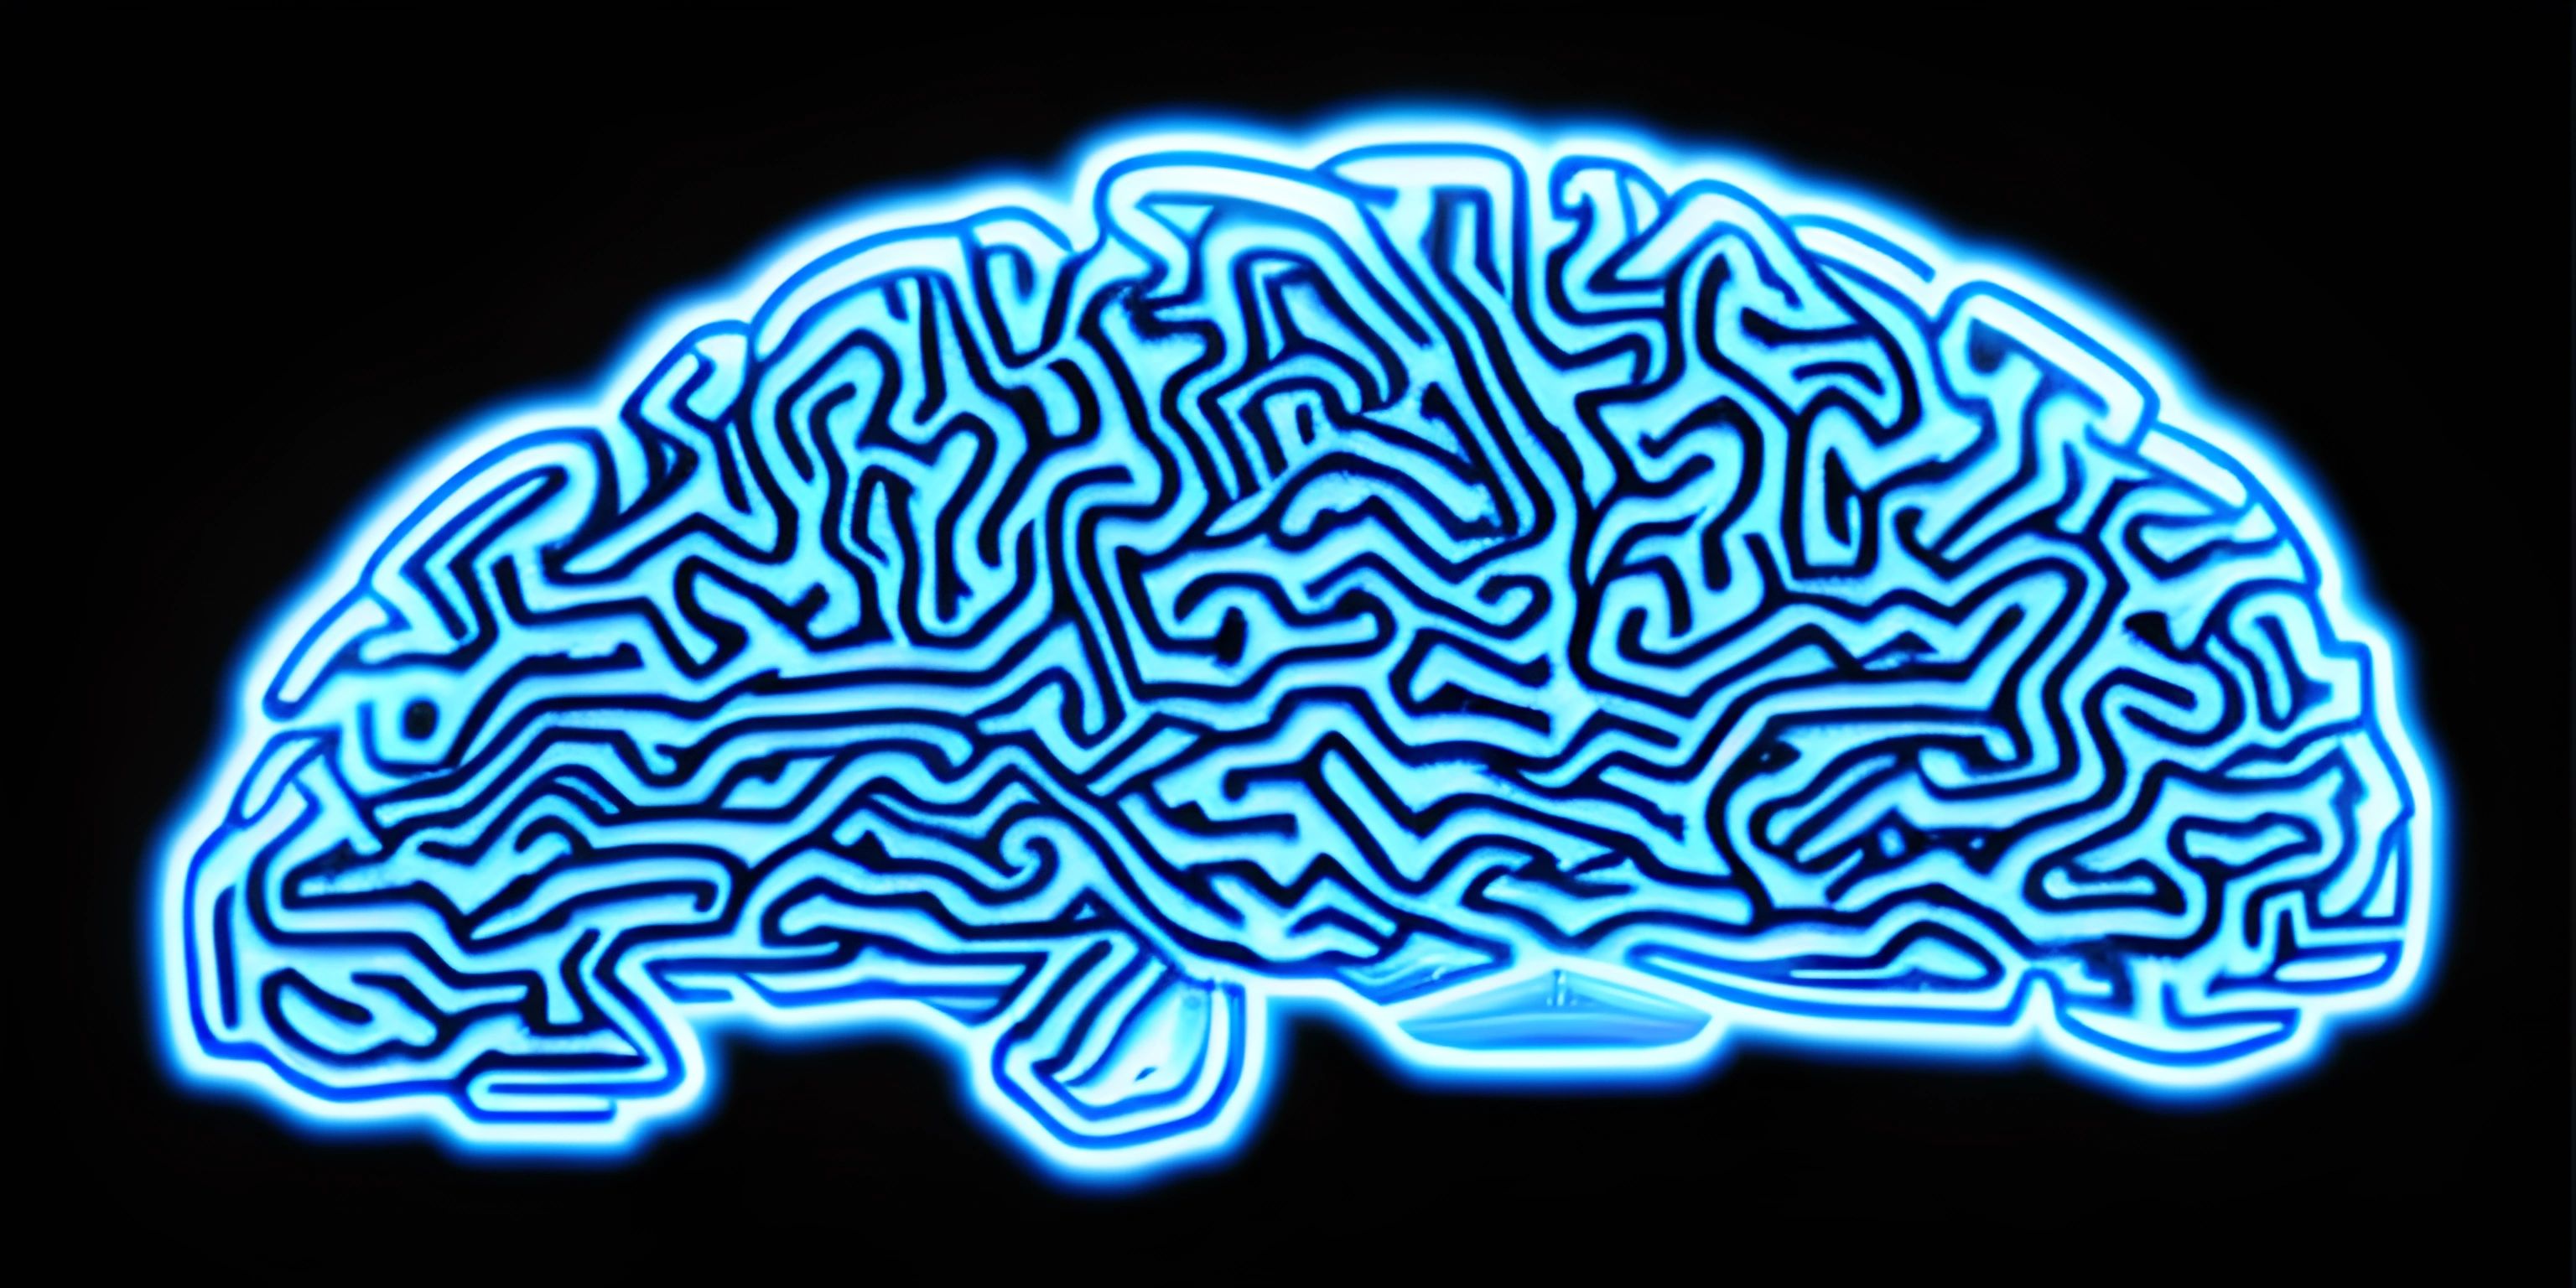 a close up of a glowing human brain on a black background with blue highlights in the middle